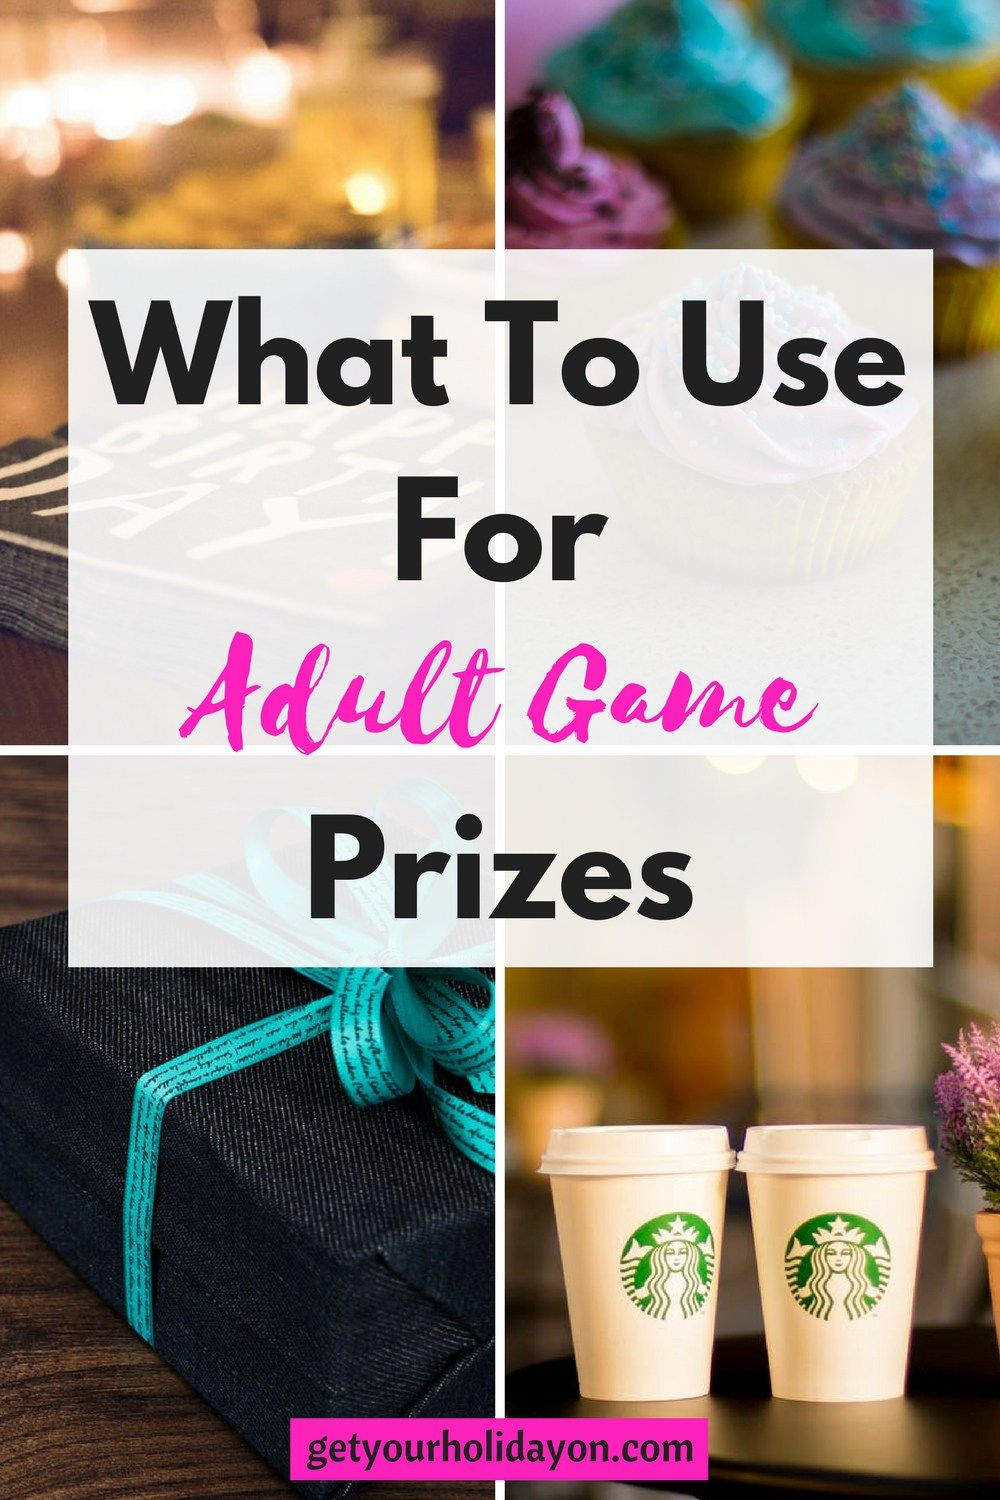 Work Party Ideas For Adults
 What To Use For Adult Game Prizes